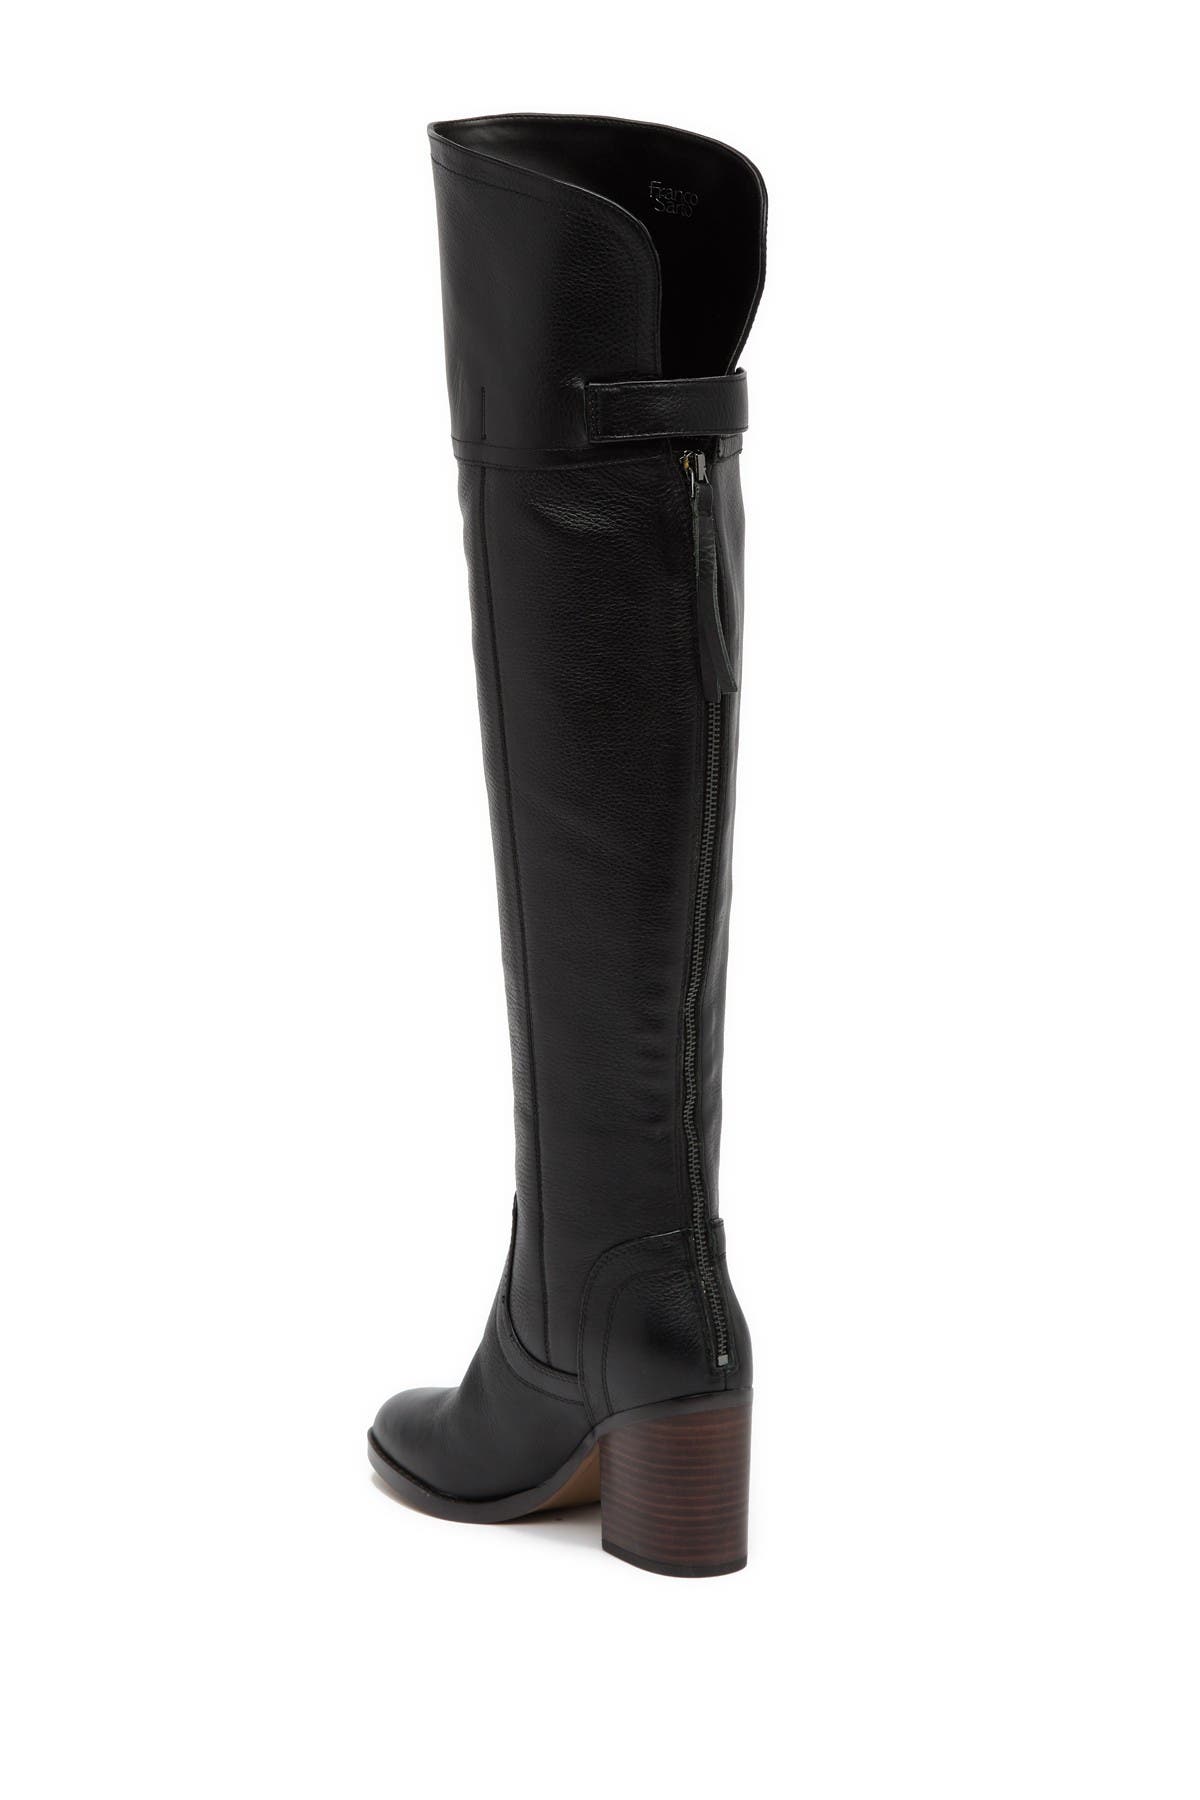 franco sarto ollie leather over the knee boot